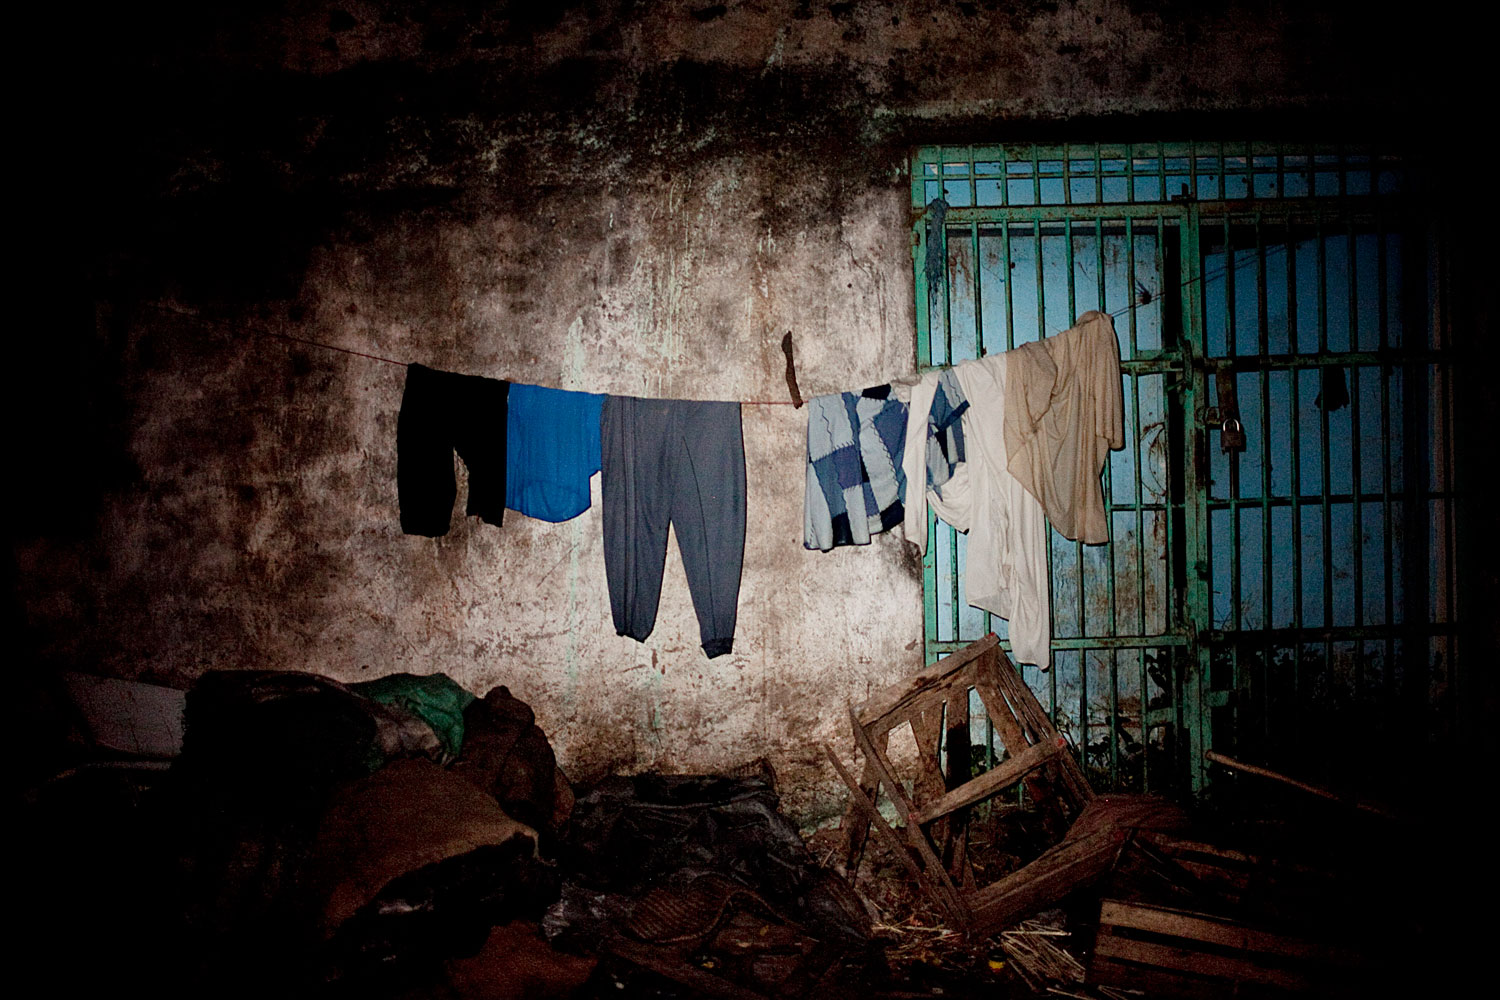 October 6, 2011. Clothing belonging to rebel fighters hangs on a line in Kurmuk, Republic of Sudan. Since fighting began in September, Kurmuk has been abandoned by the civilian population. Shops are shuttered, trash is piling up, the town has come to a standstill.